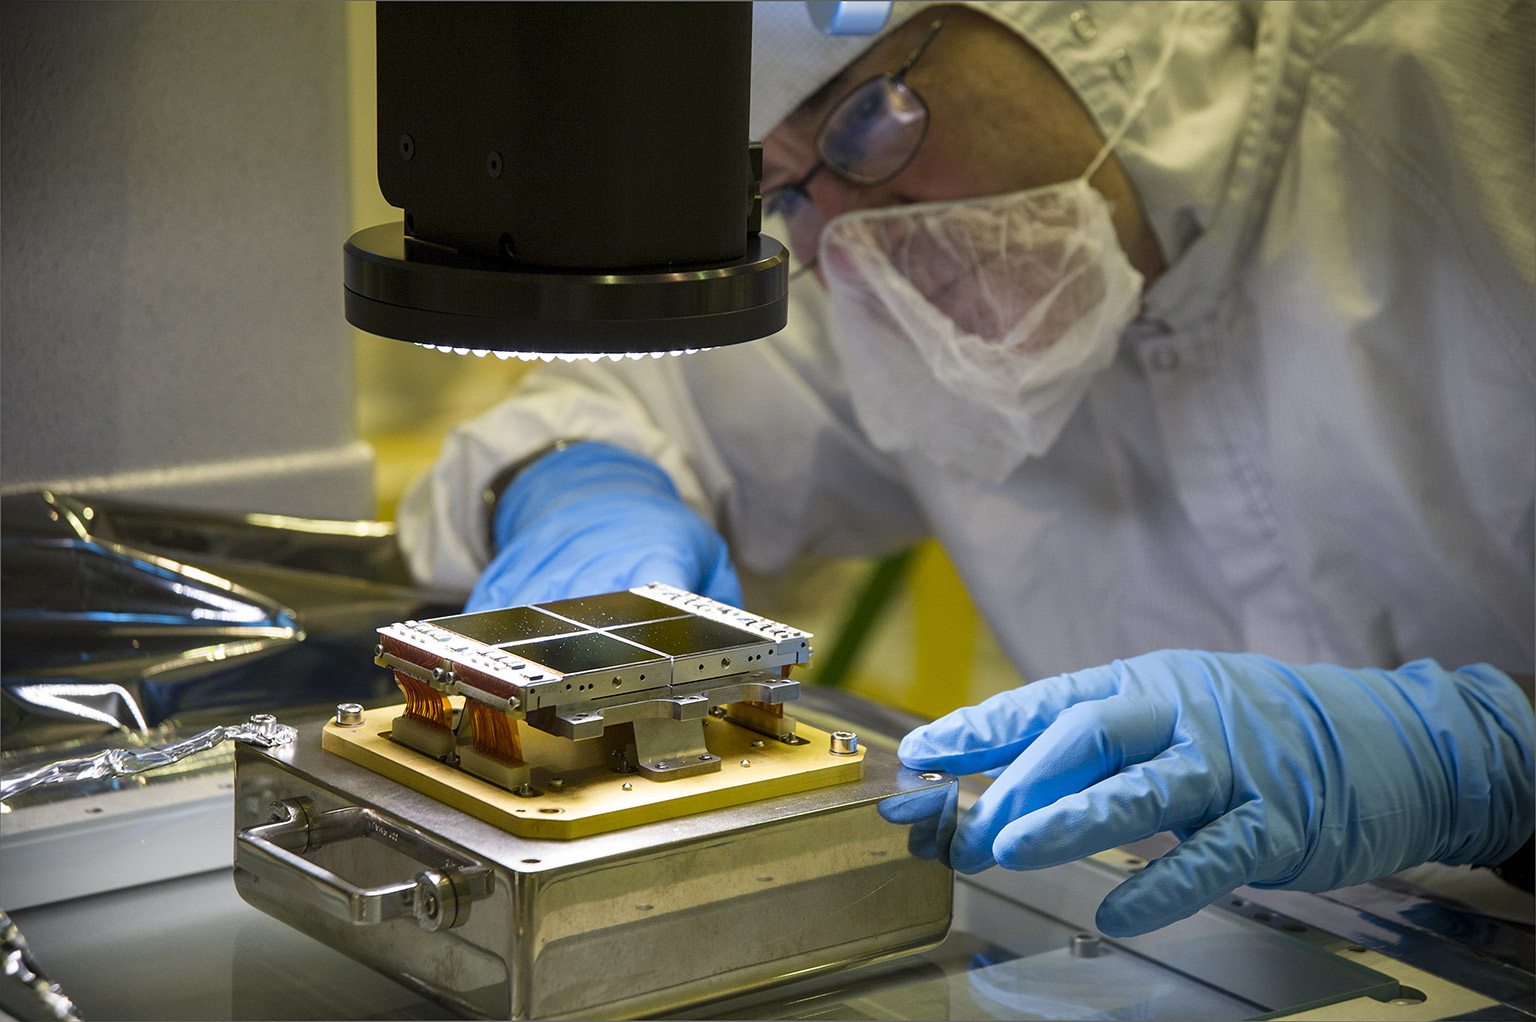 A technician in a cleanroom suit inspects parts to an instrument through a 3D microscope.